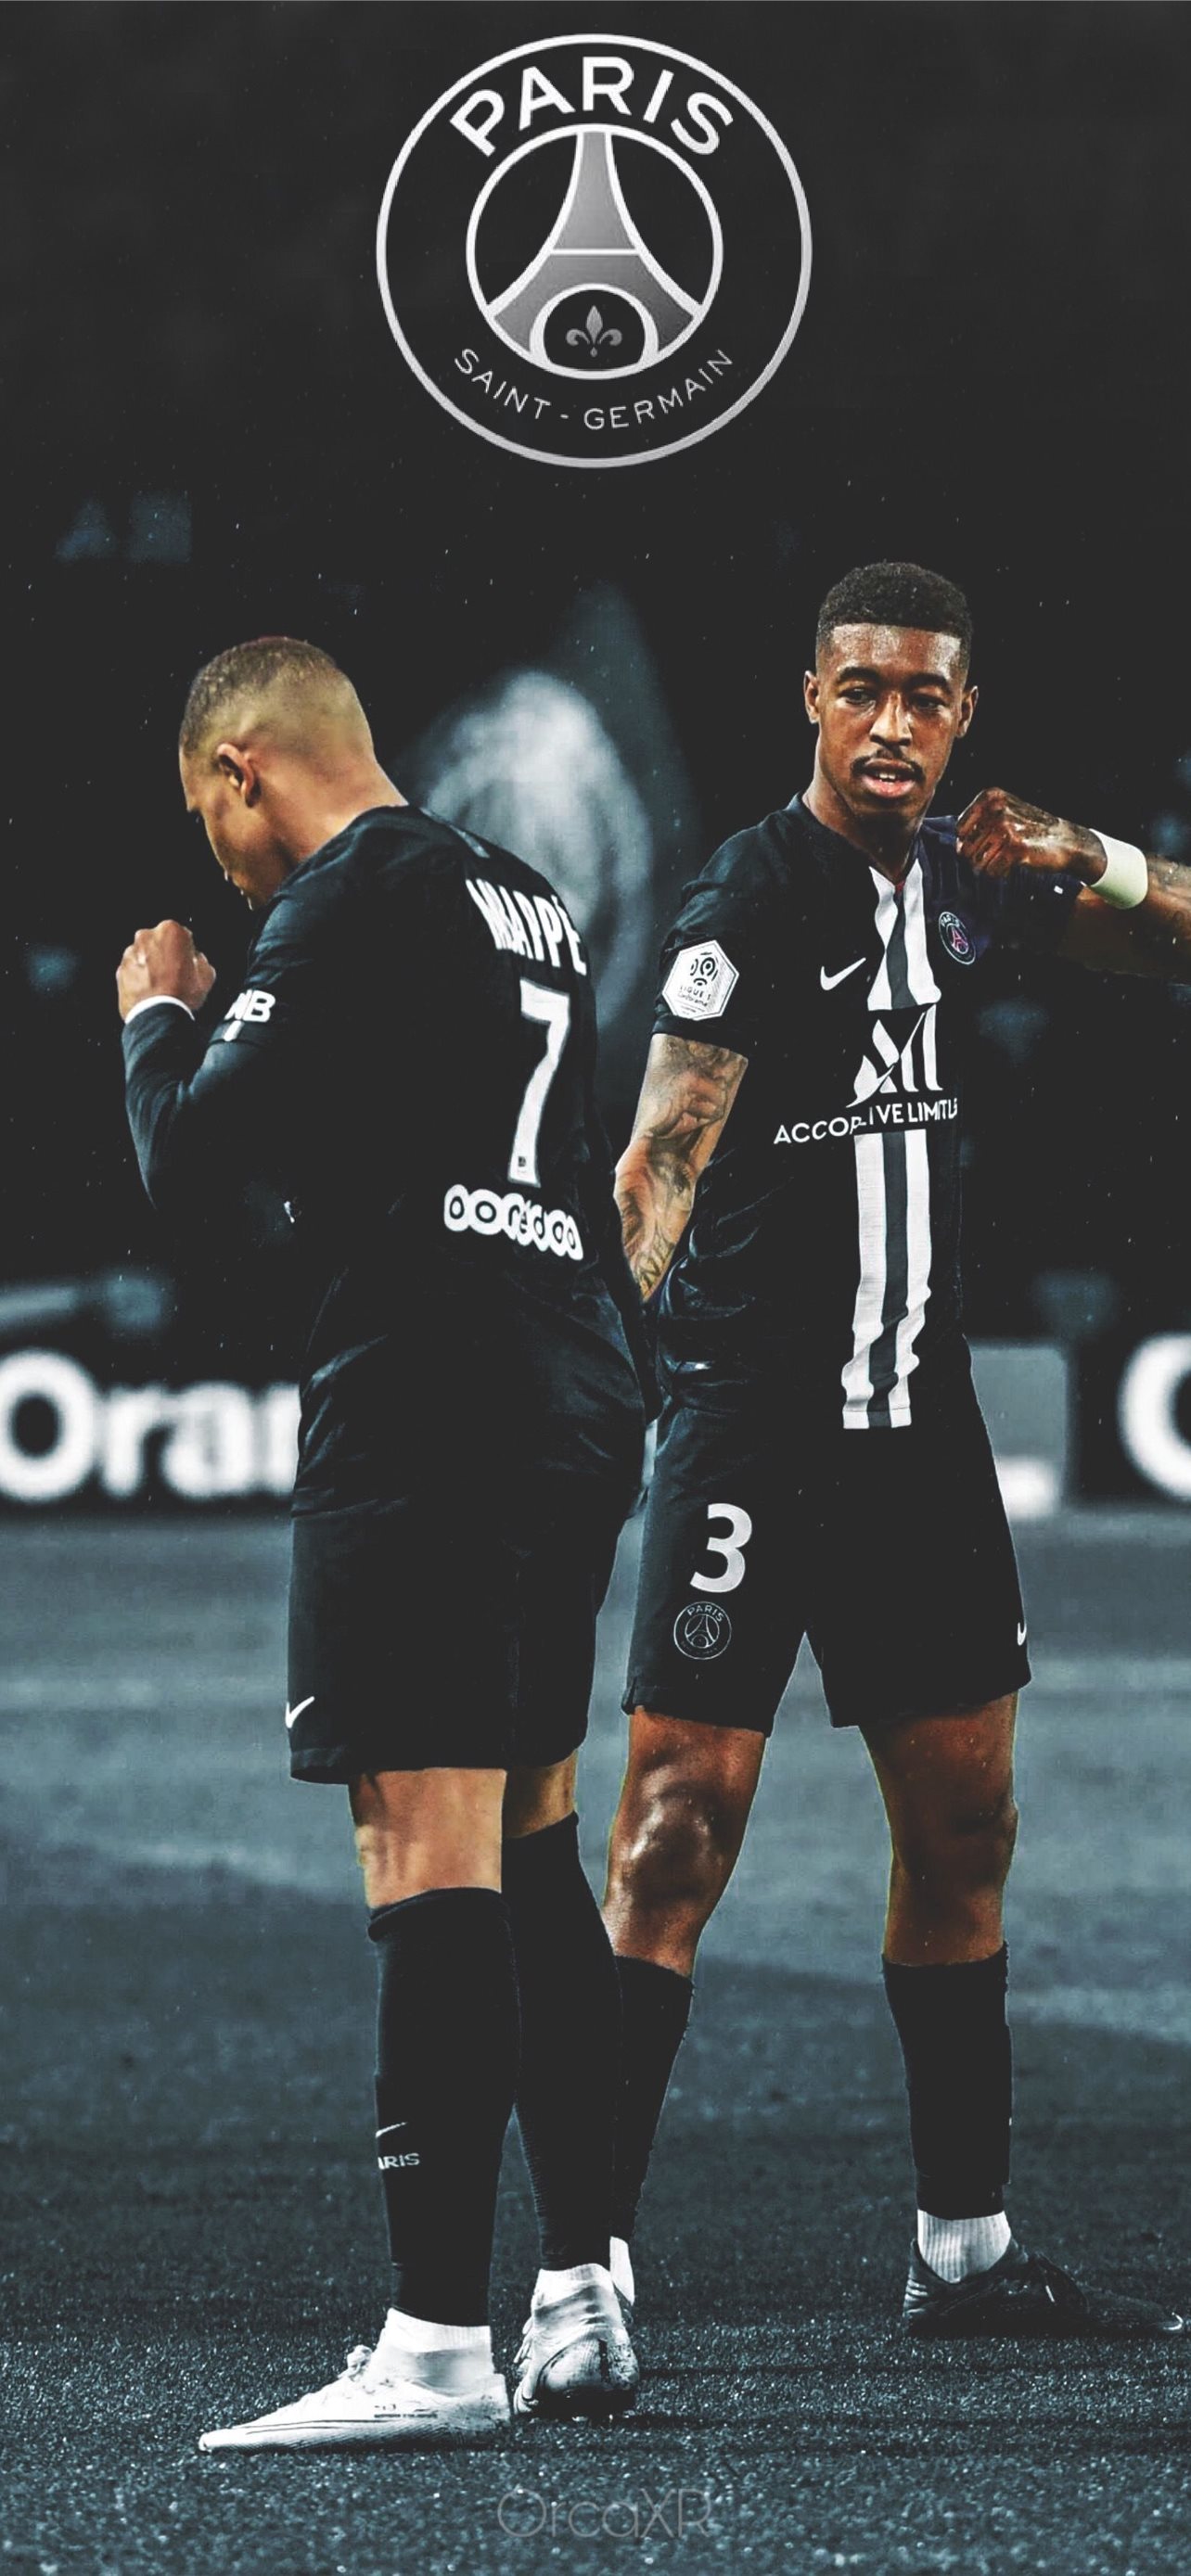 Mbappe Wallpaper HD Discover more Footballer Forward France Germain  Mbappe wallpaper httpswwwenwa  Kylian mbappé Football poses  Football players images